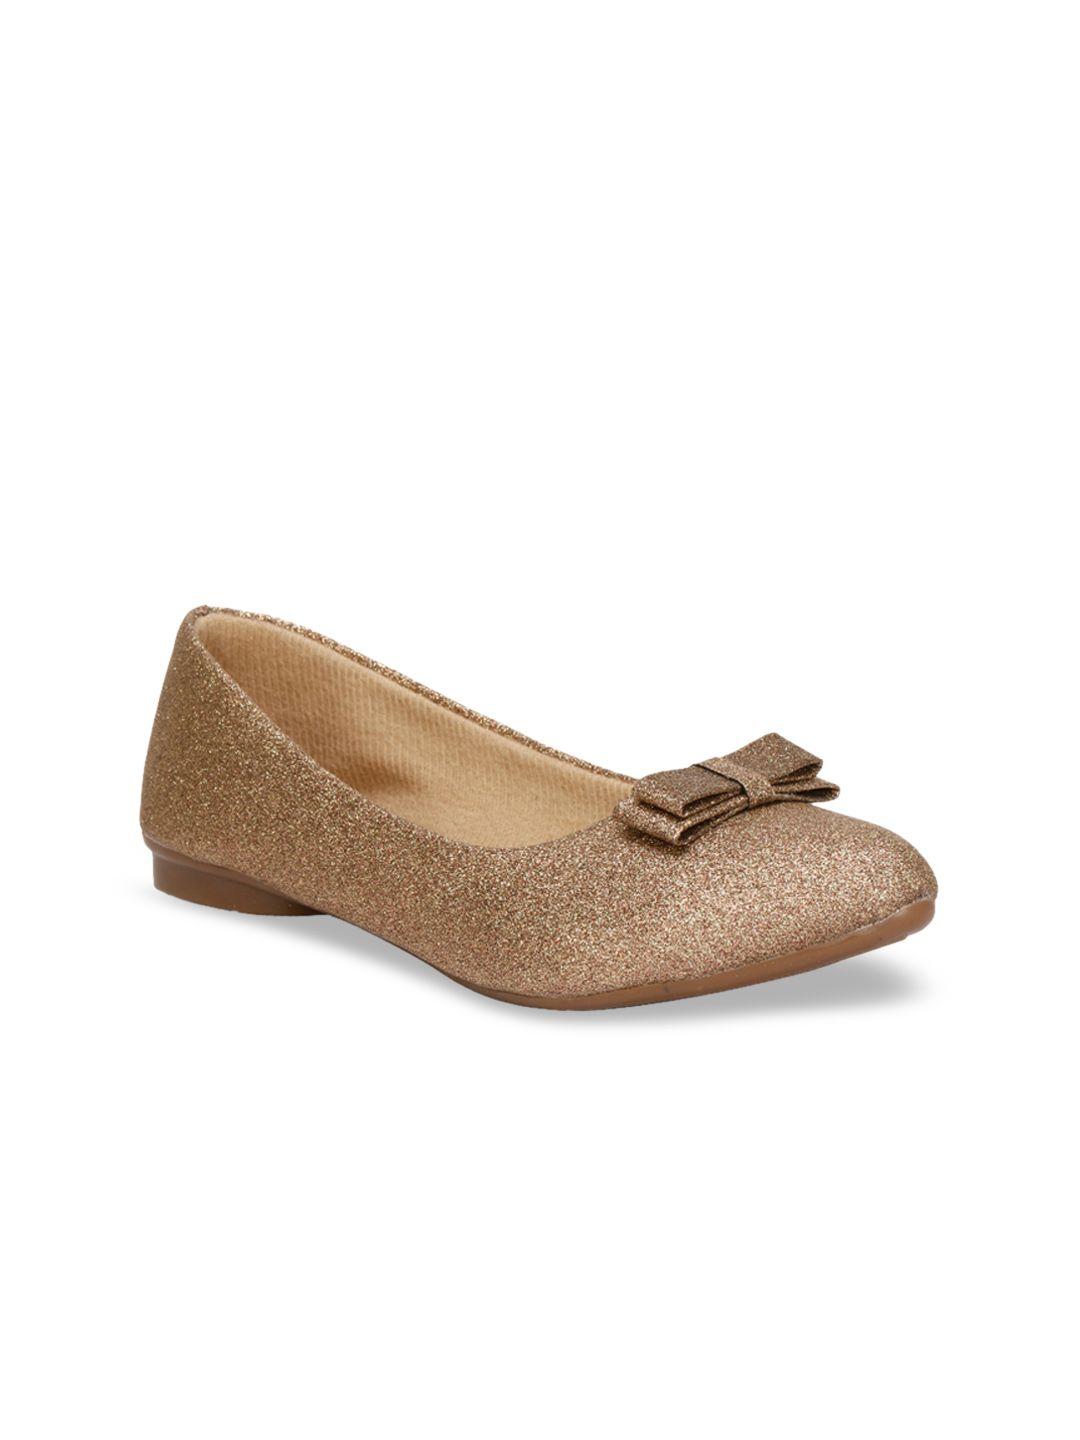 denill women copper-toned ballerinas with bows flats